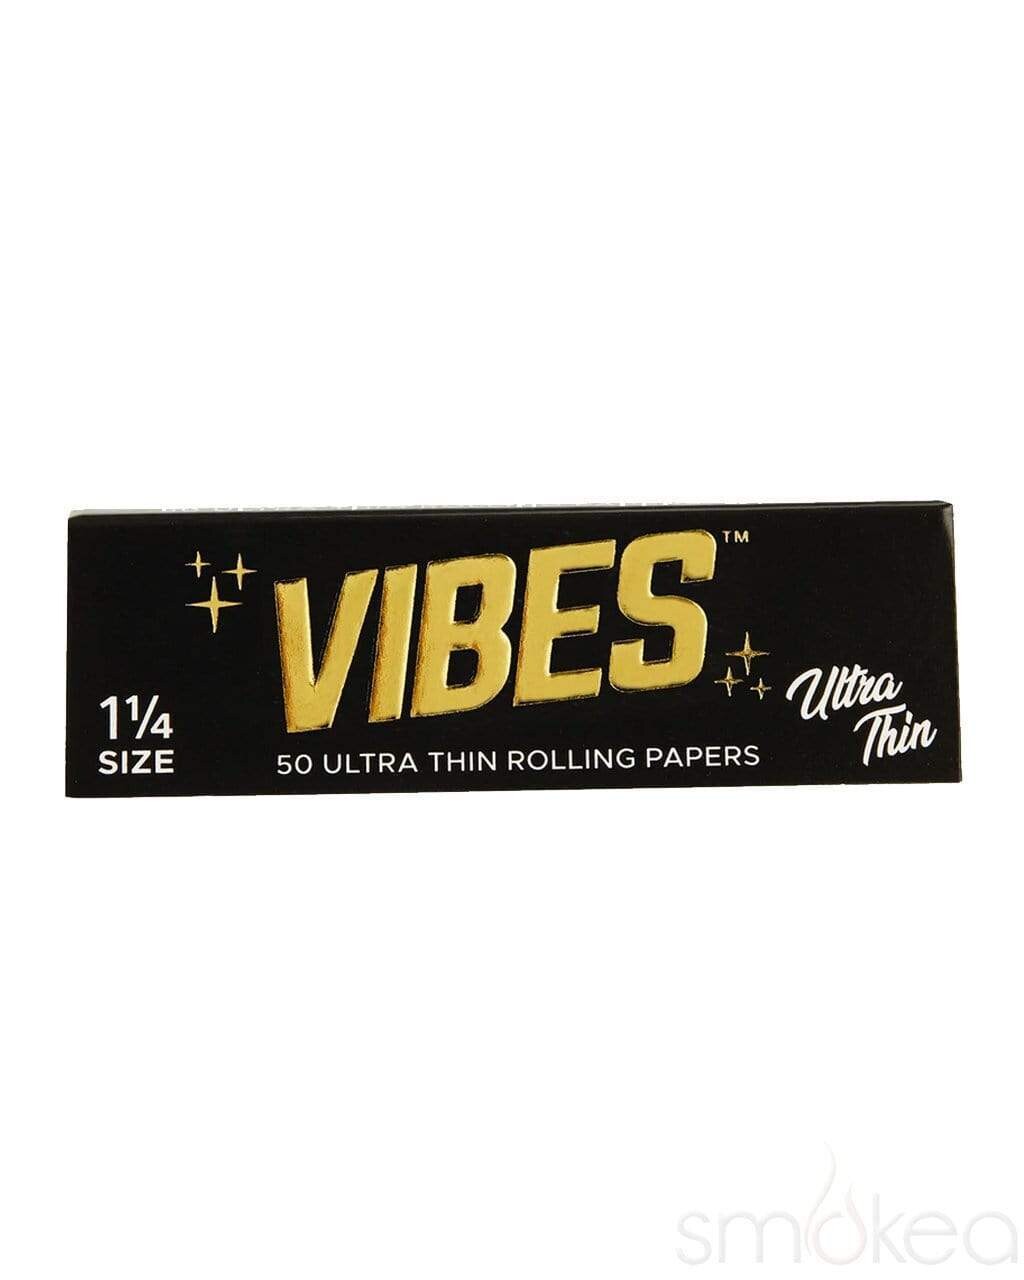 Vibes Ultra Thin Rolling Papers 1 1/4 50ct